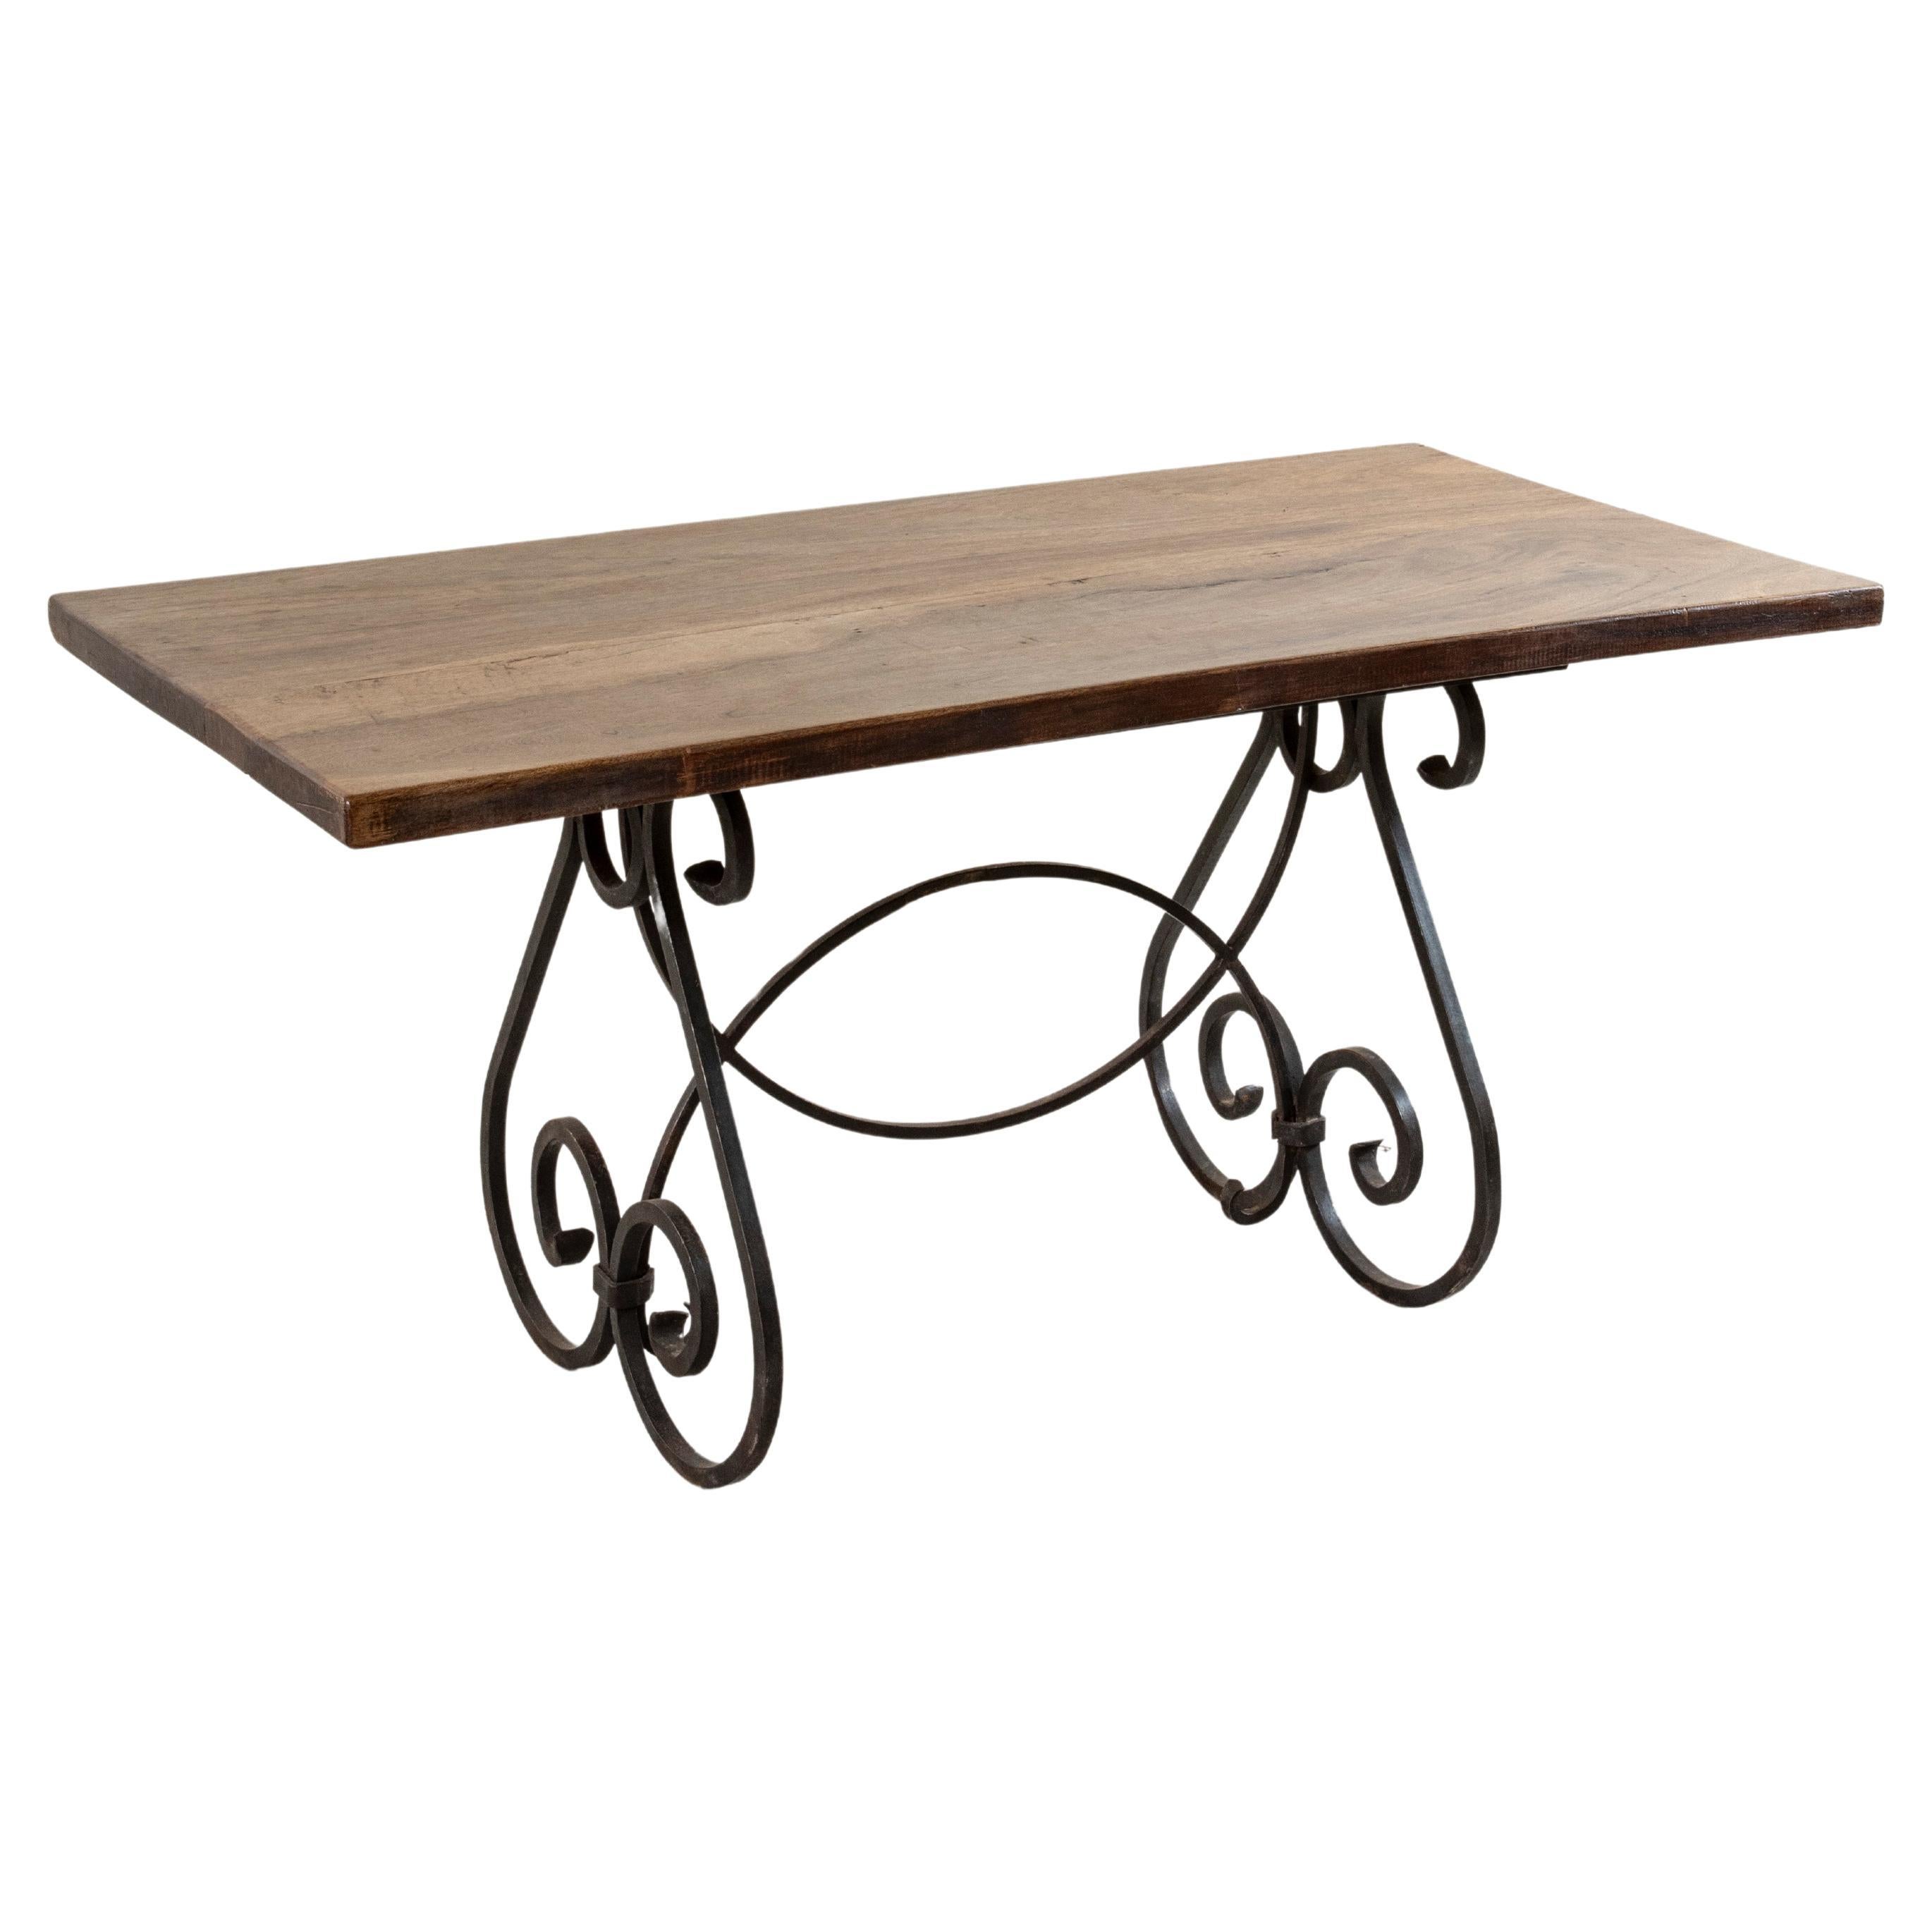 Mid-20th Century French Artisan Made Walnut and Iron Dining Table, Writing Table For Sale